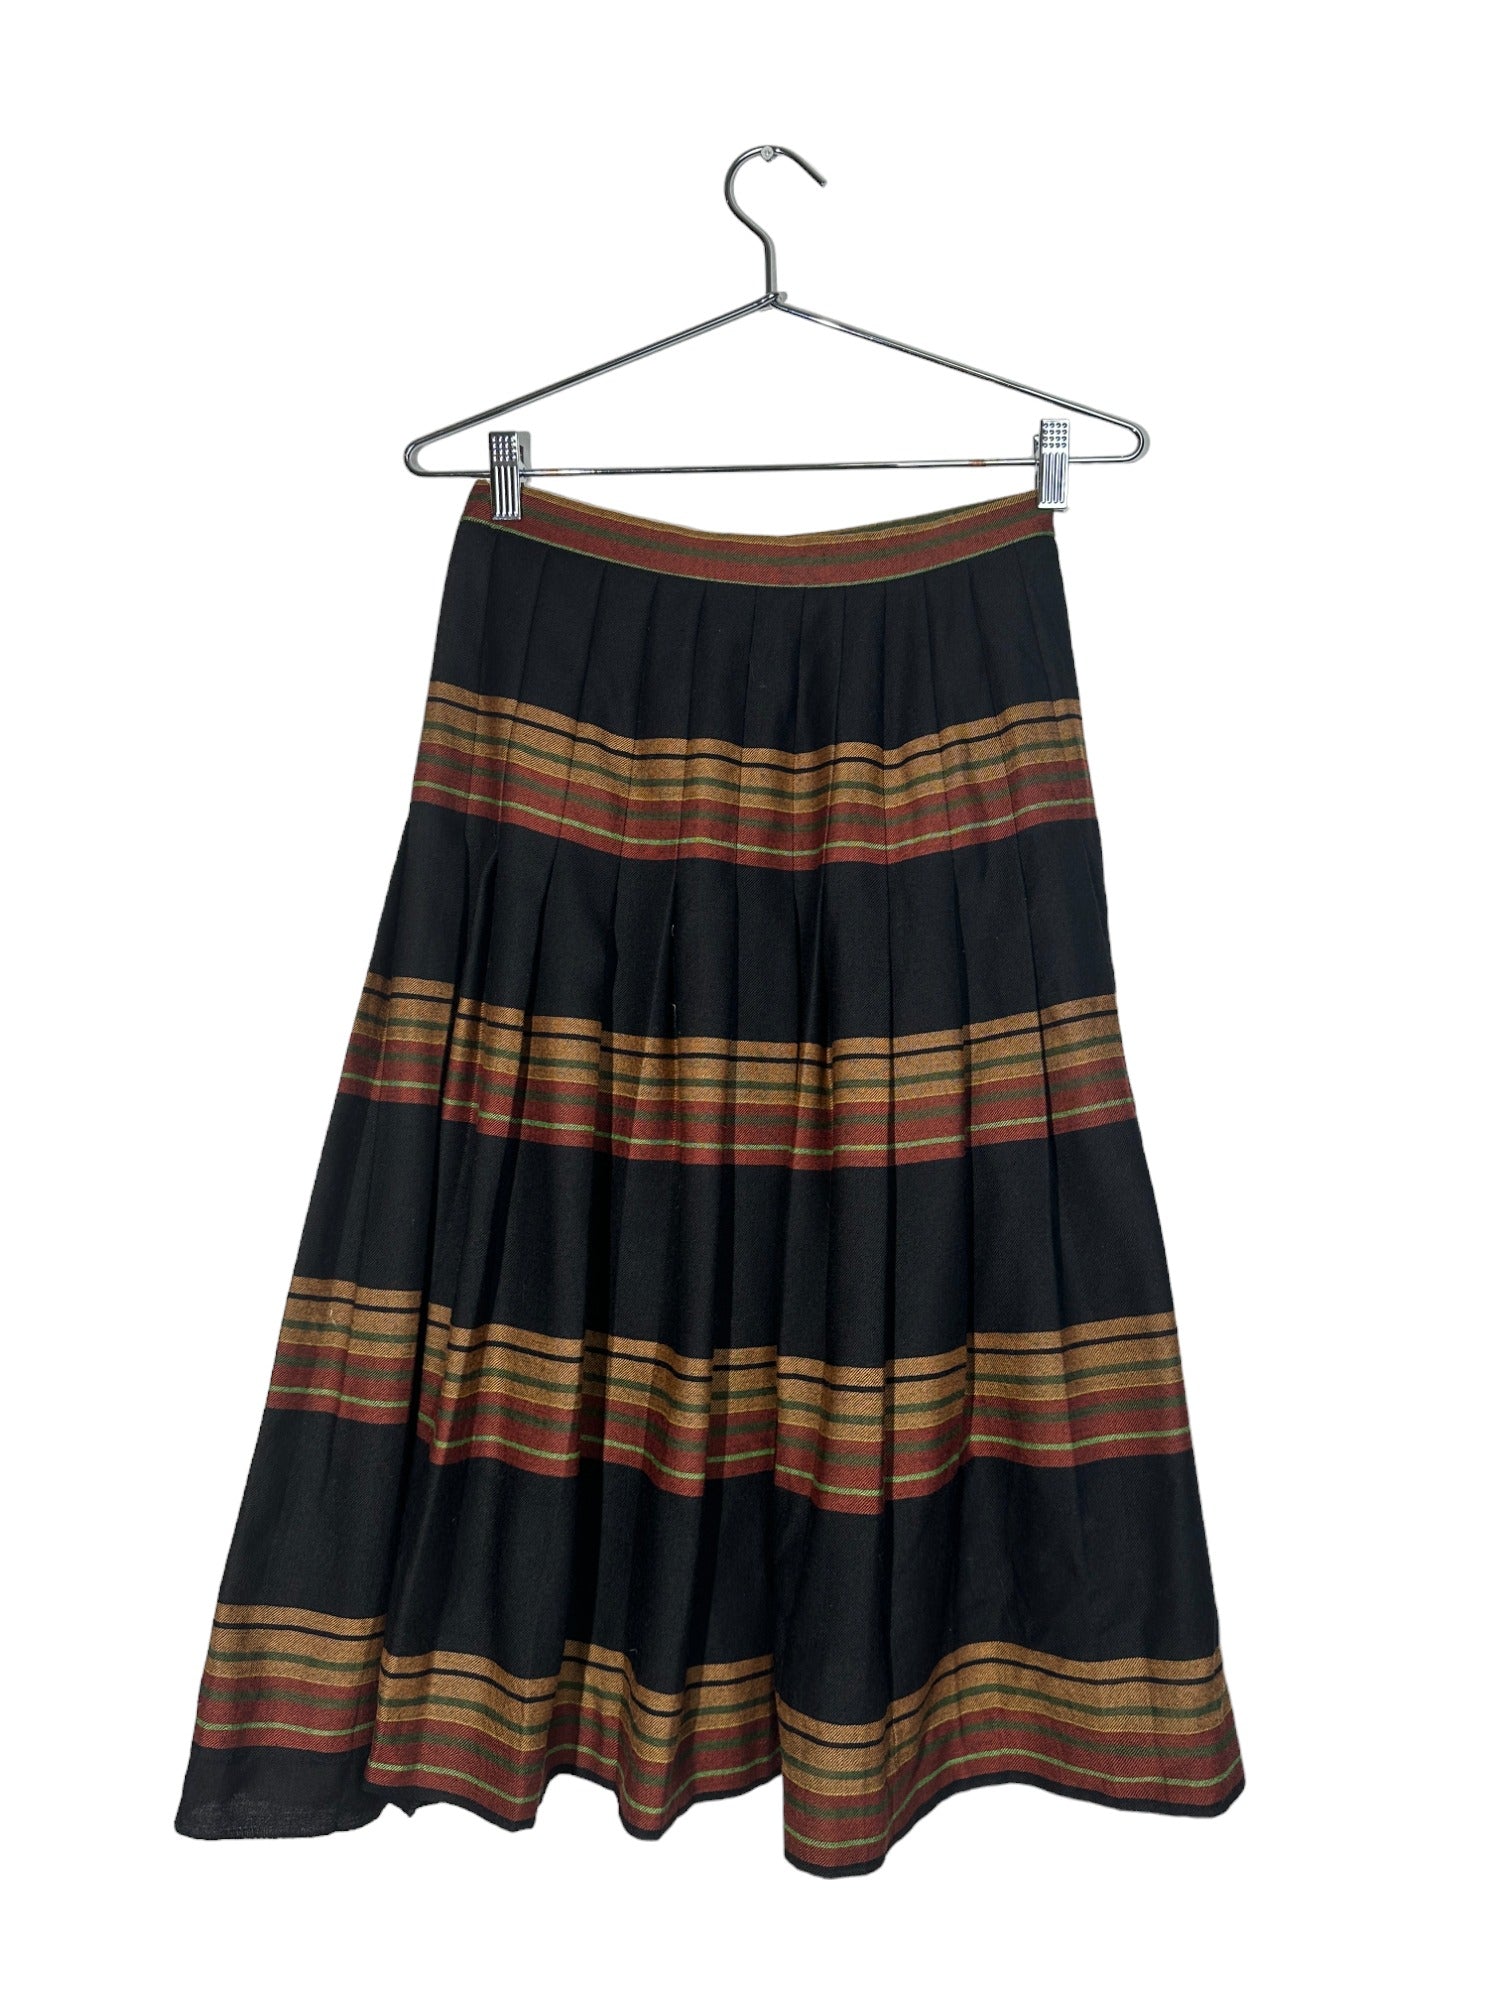 Brown And Black Stripped Skirt